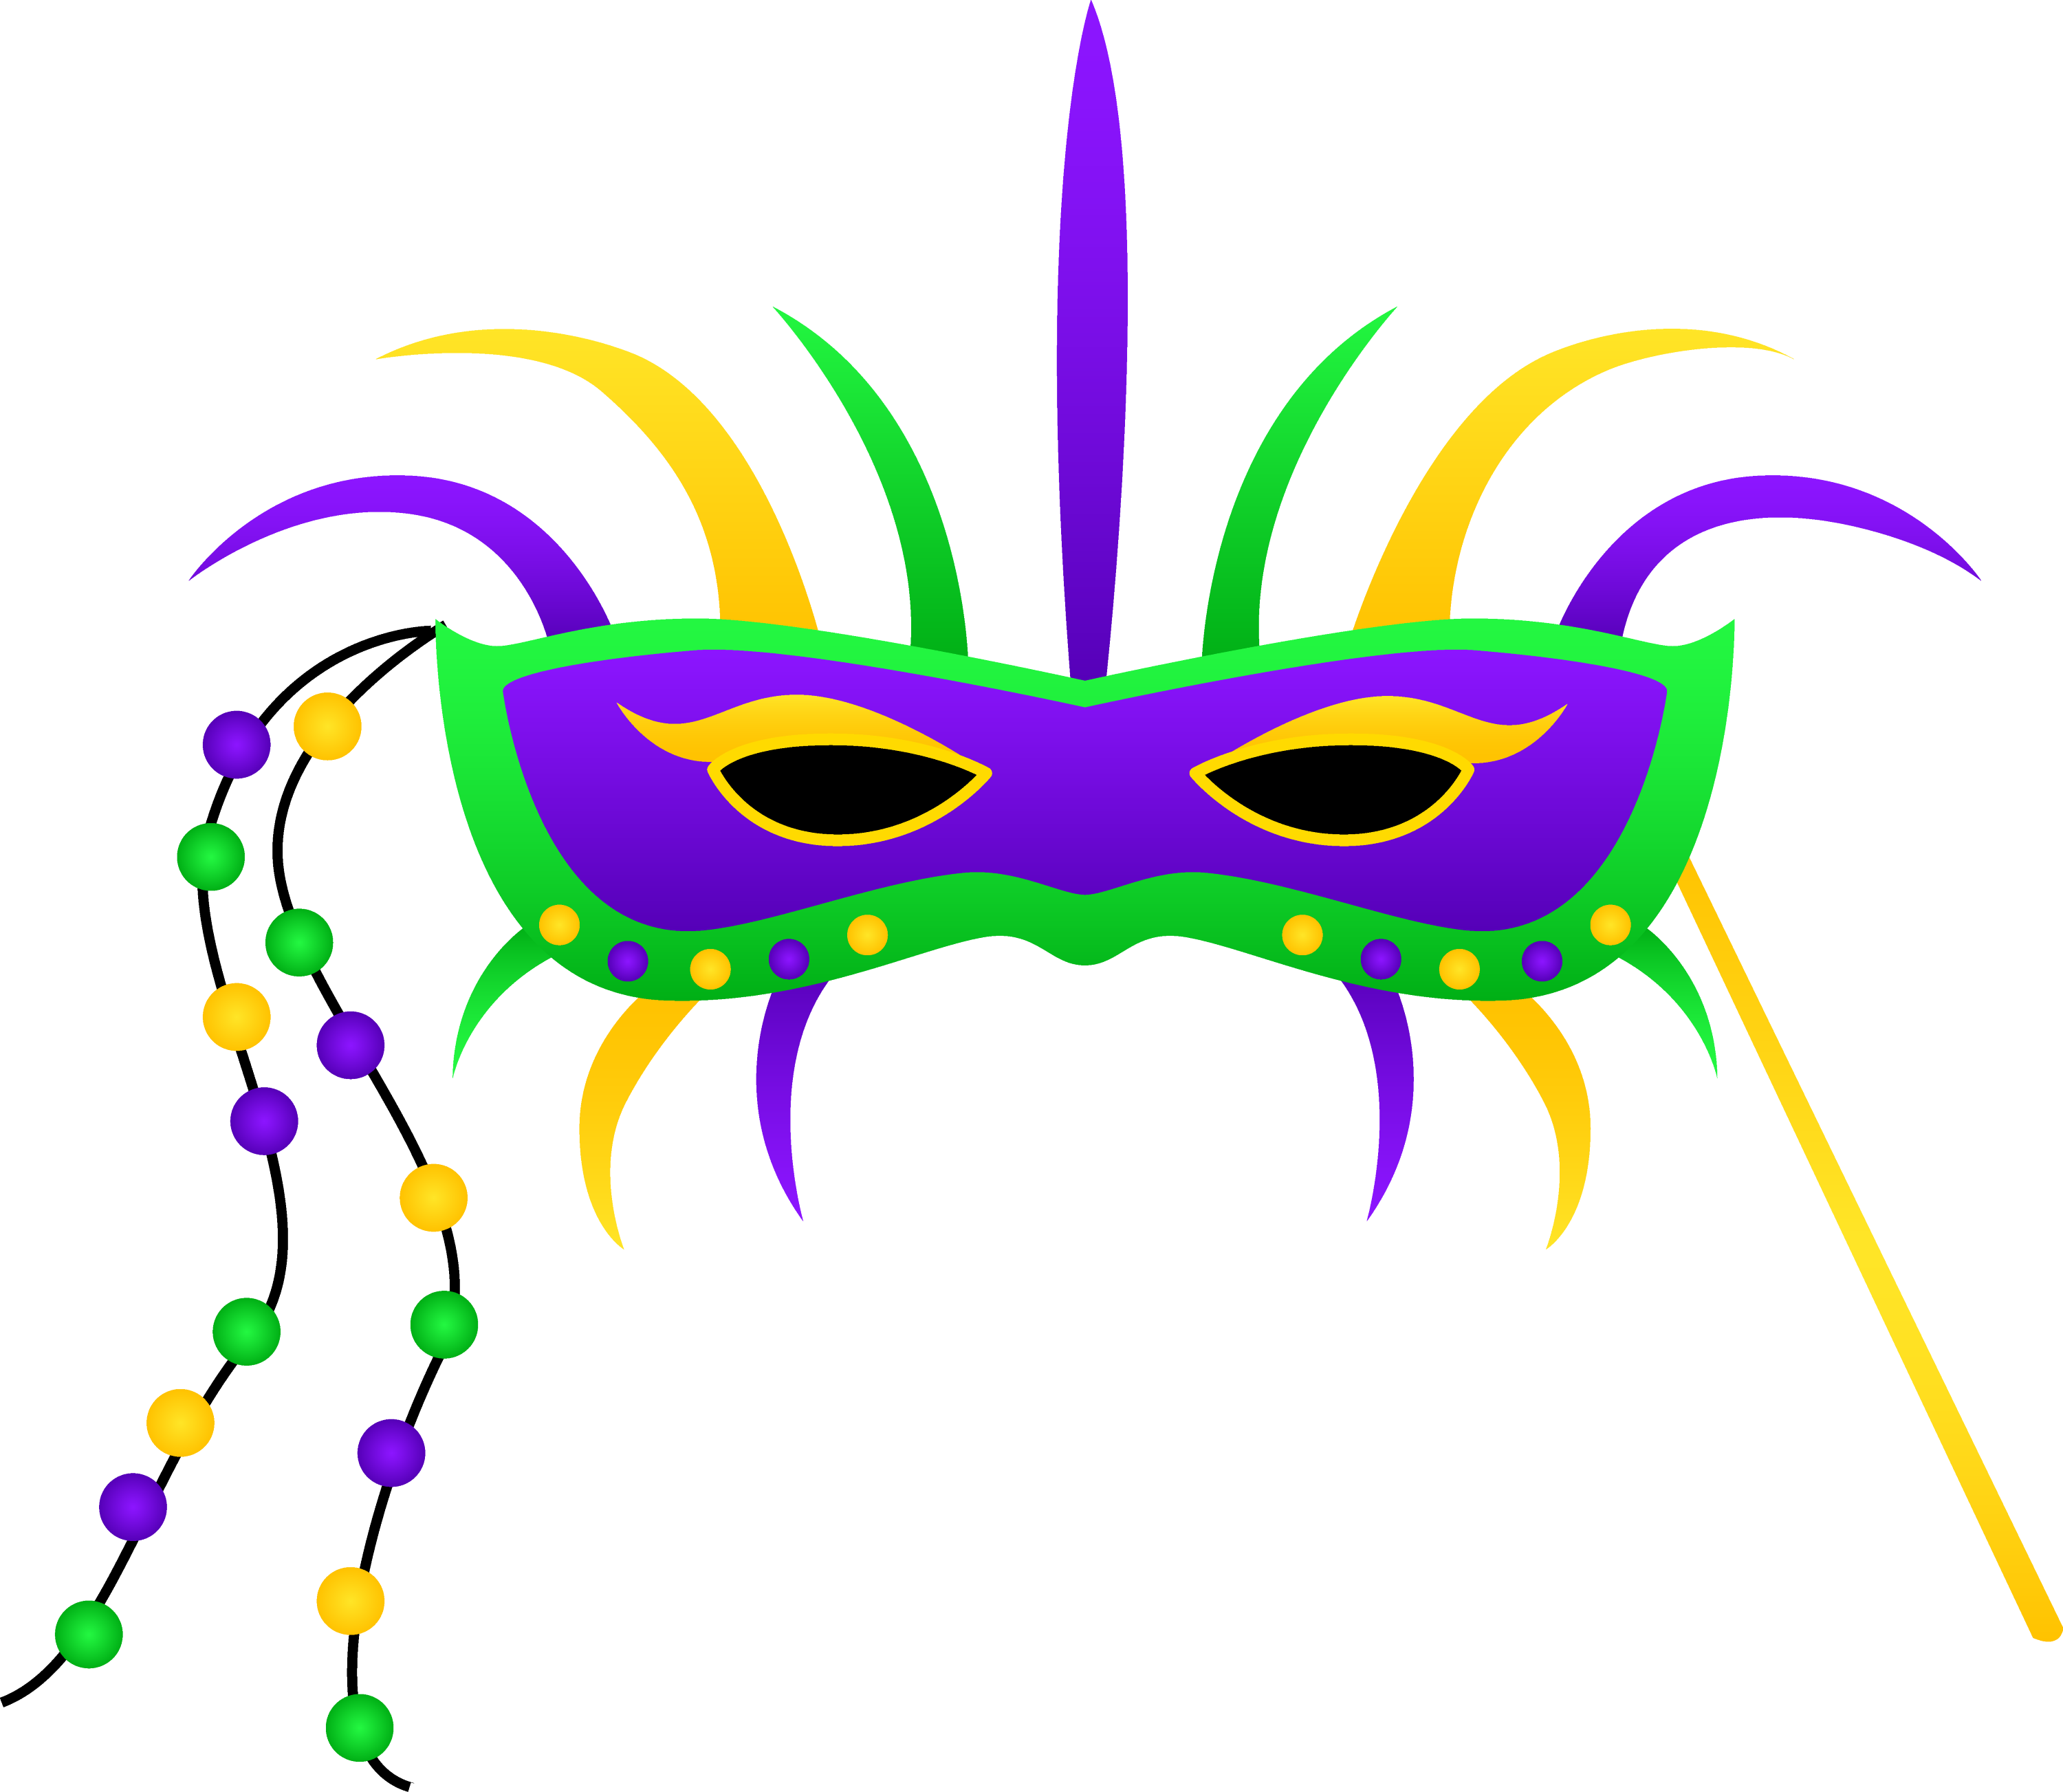 Download Free SVG Mardi Gras Festival Mask Clipart - Free Clip Art from swe...